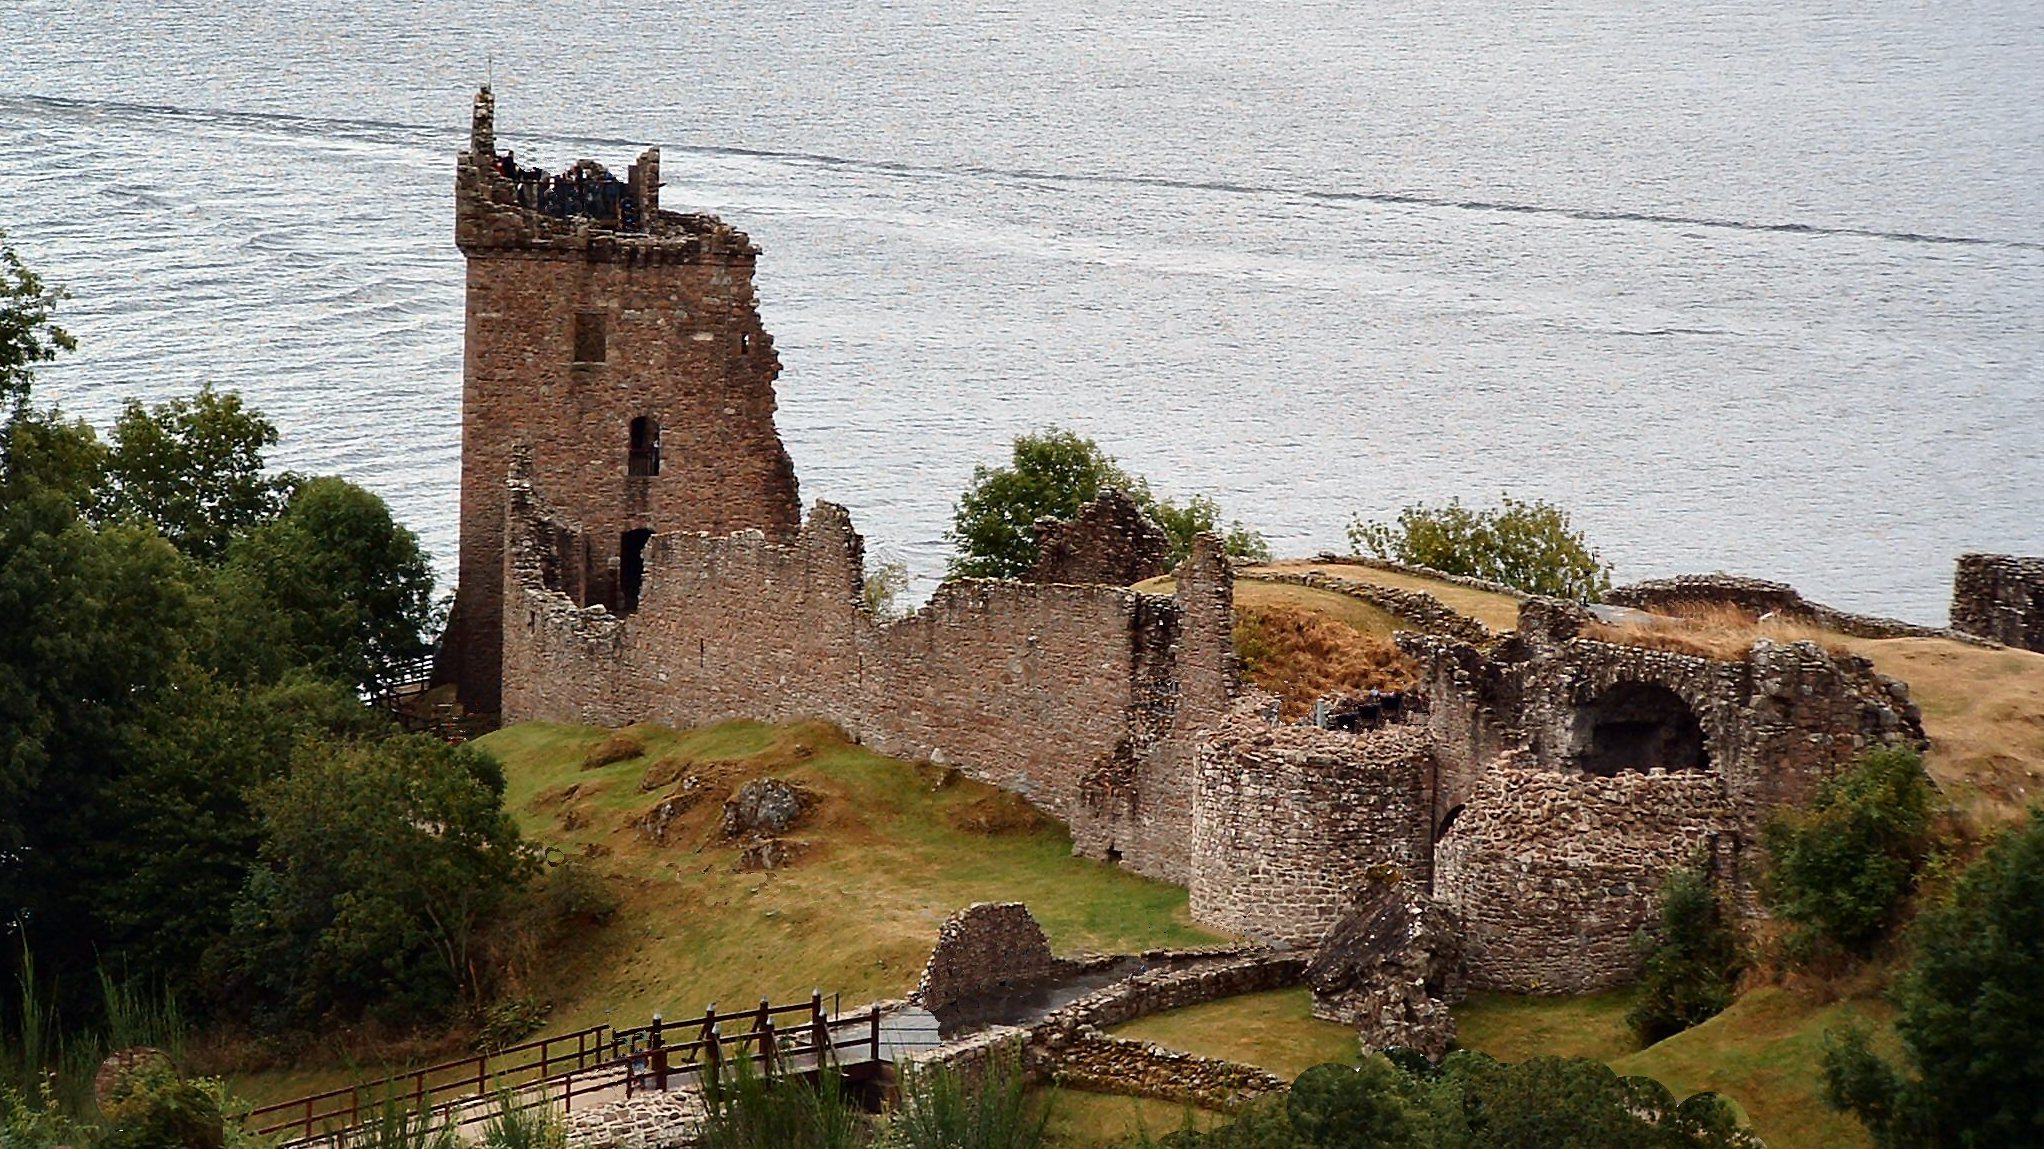 Urquhart Castle sits on a promontory overlook Loch Ness. Perhaps that is Nessies' wake in the background. (2003)